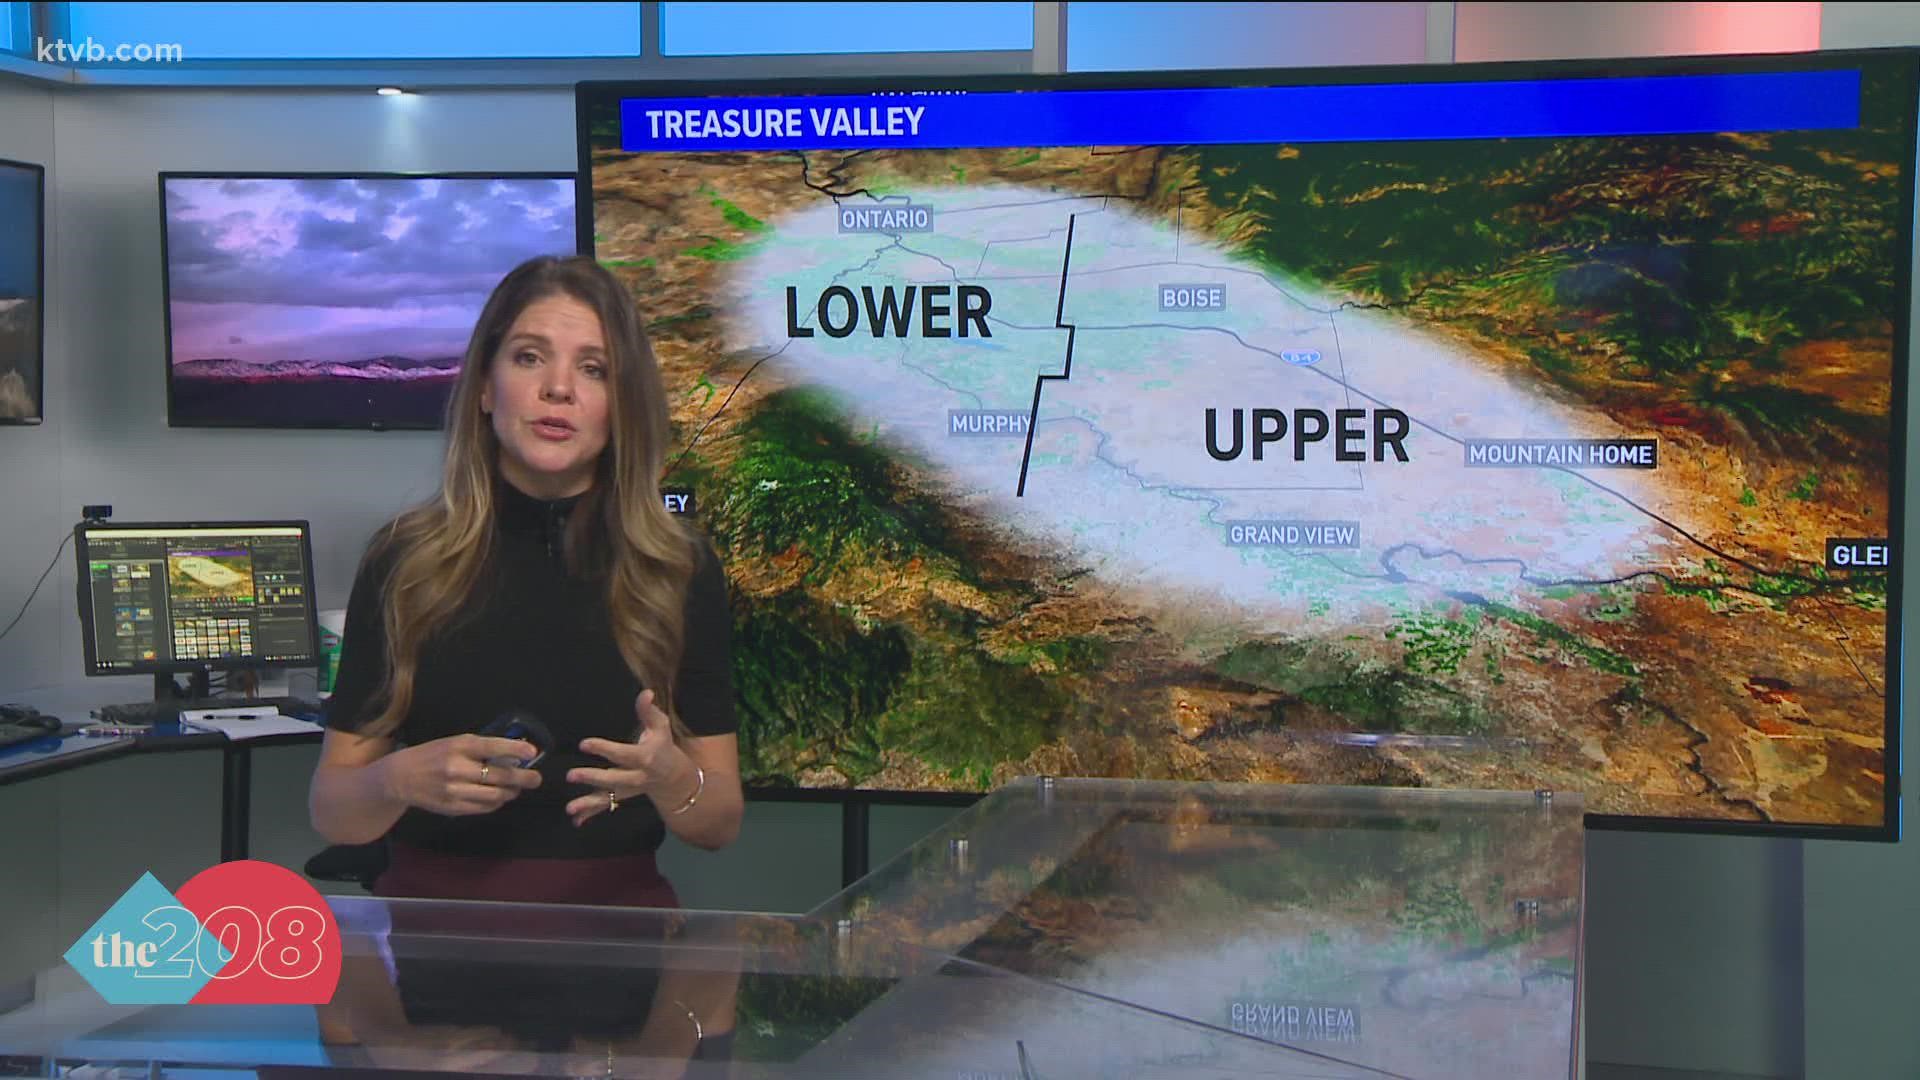 Meteorologist Bri Eggers answers a frequently-asked question about terms related to the area stretching from Mountain Home to Ontario.